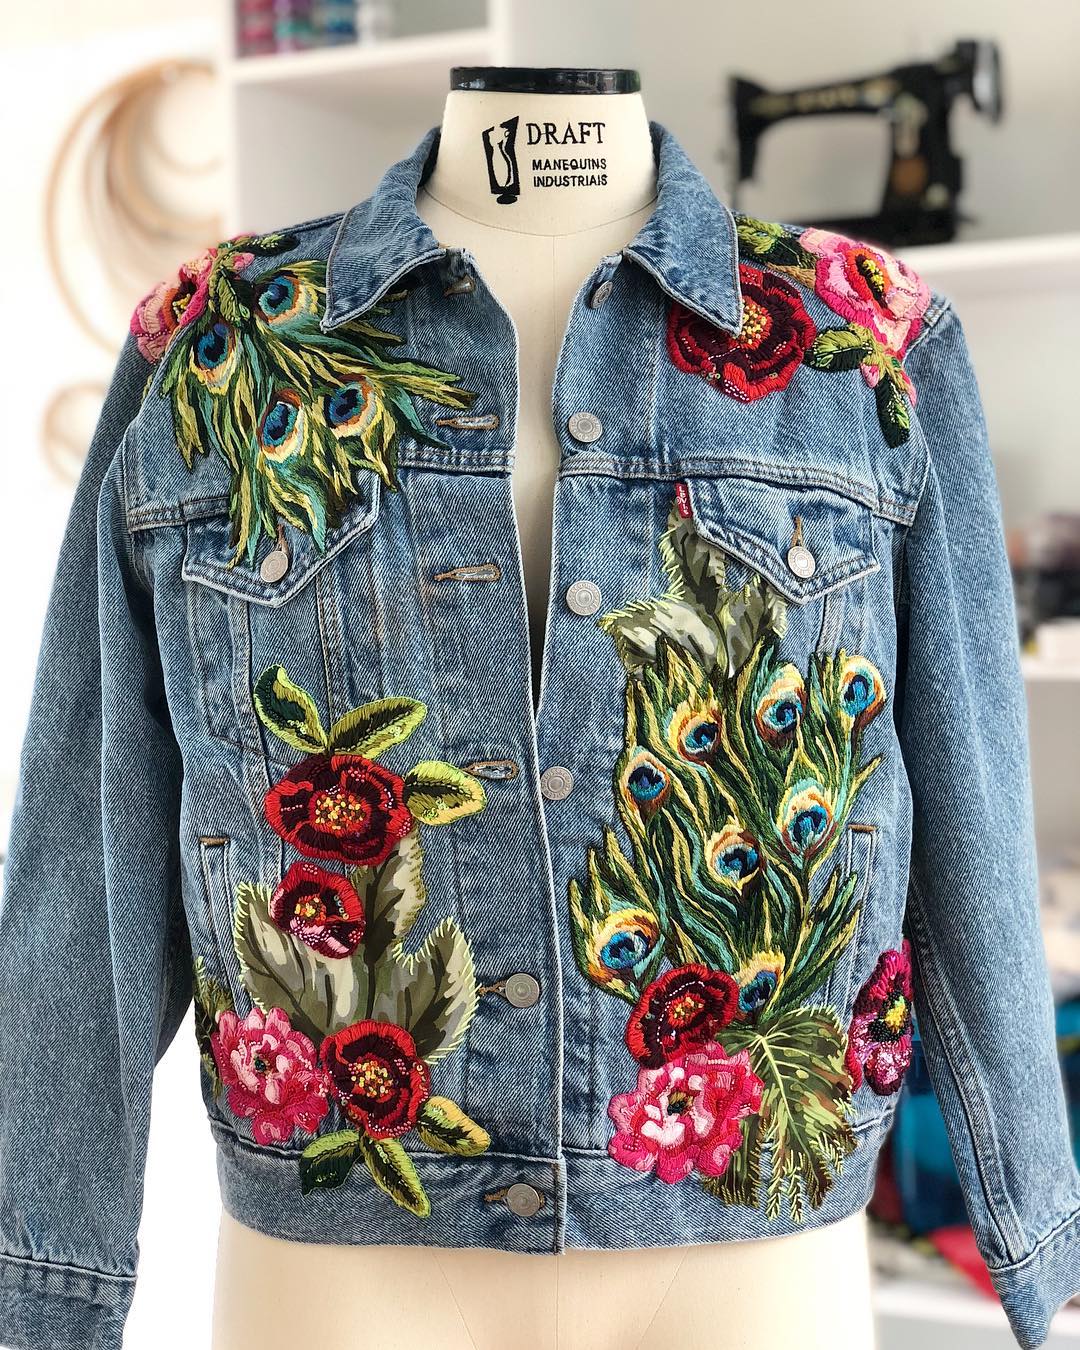 Colorful Embroideries Transforms Humble Denim Jackets into Wearable ...